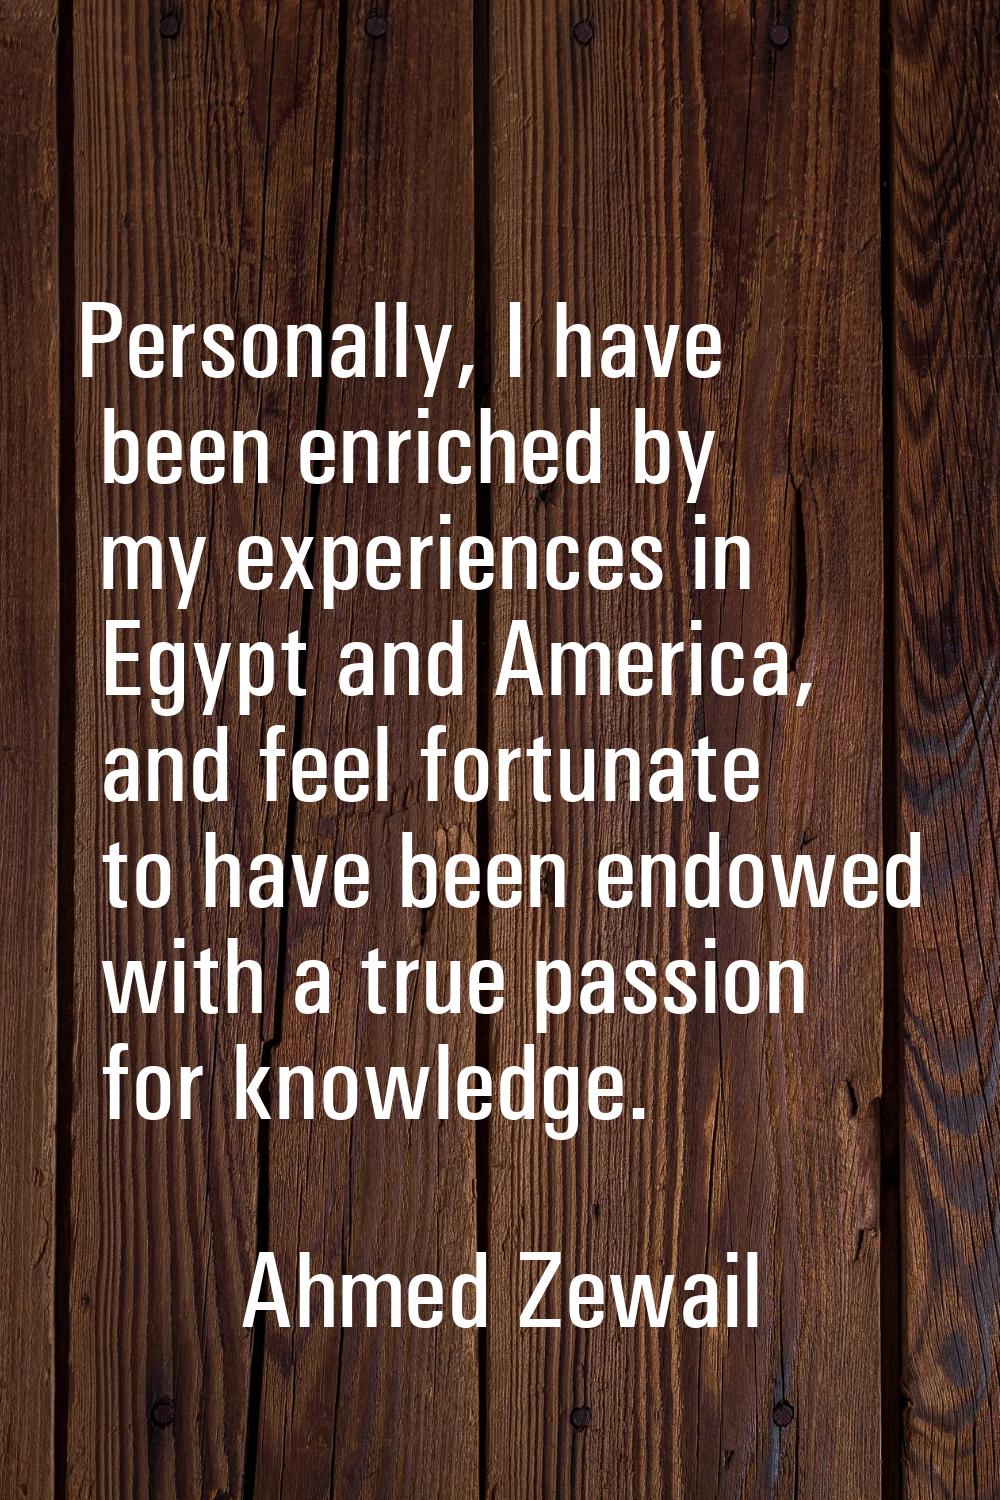 Personally, I have been enriched by my experiences in Egypt and America, and feel fortunate to have